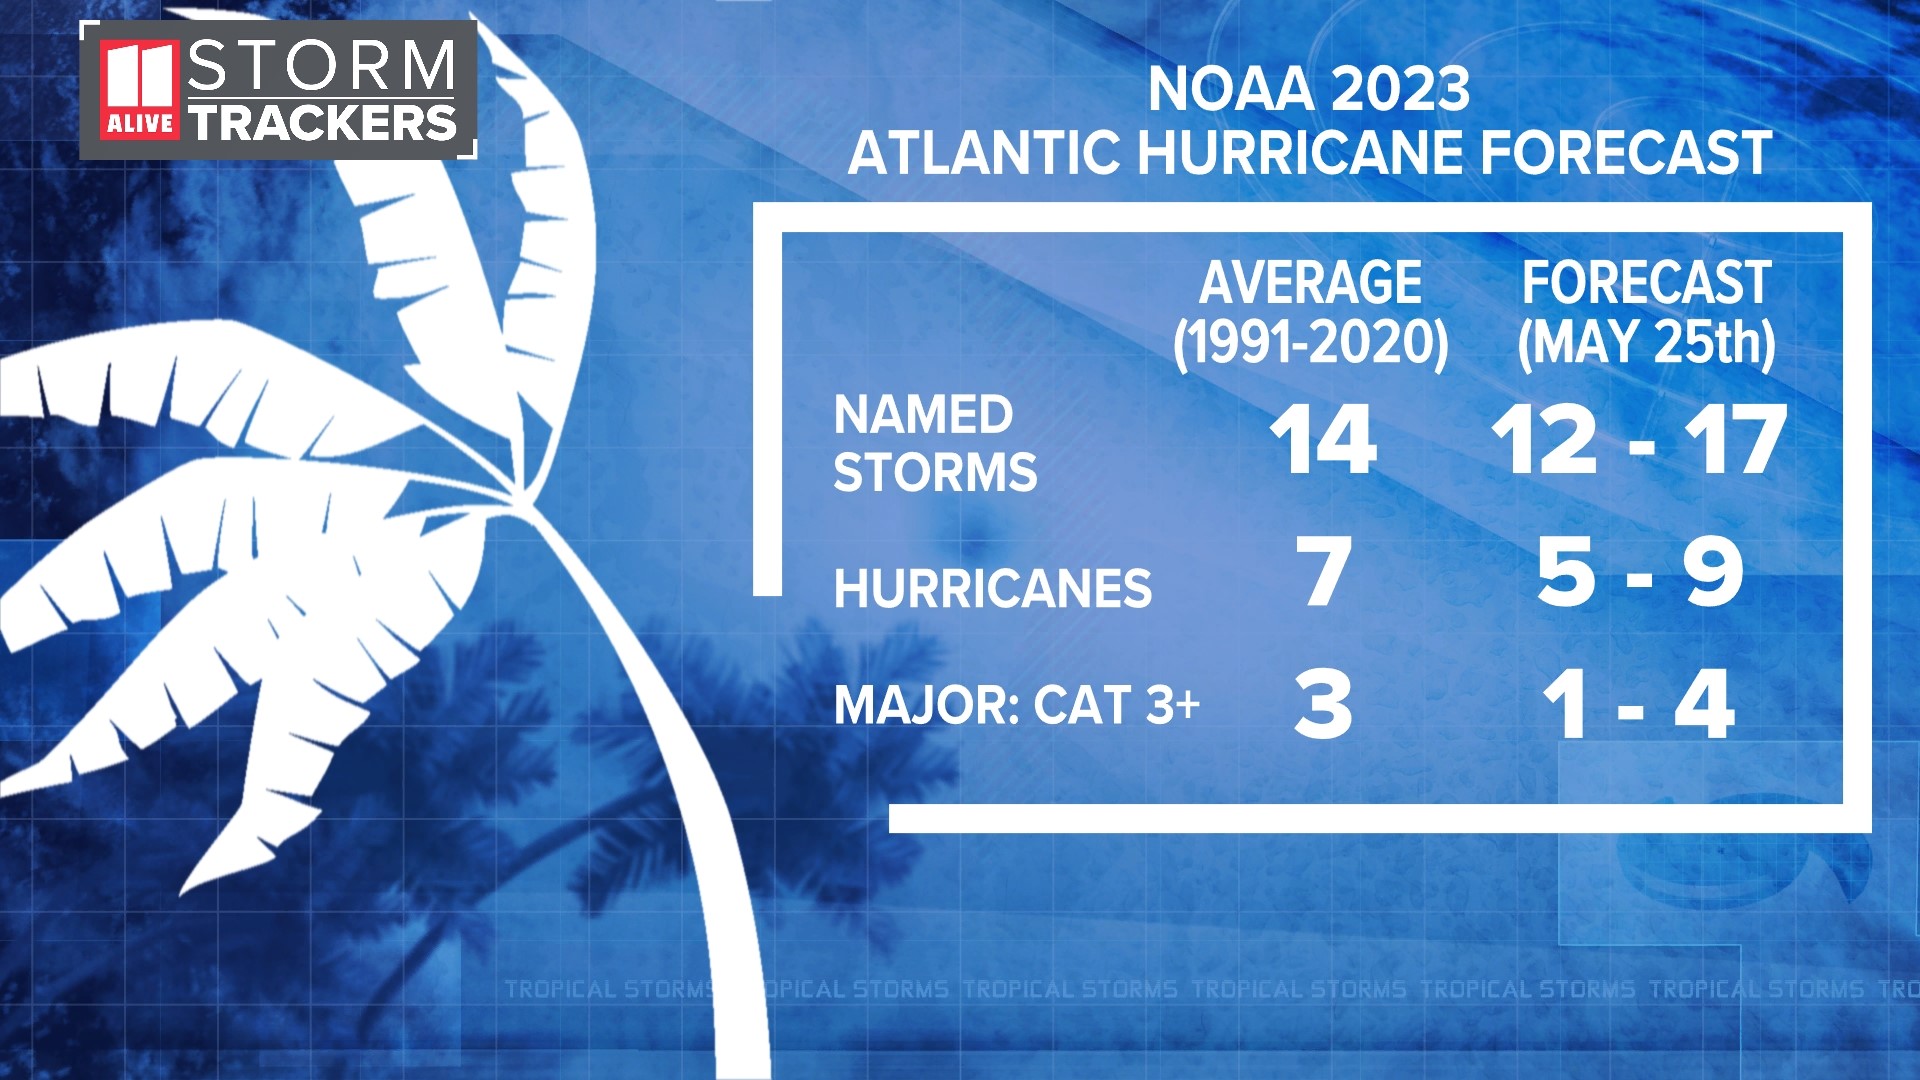 An El Niño is expected to drive the season's hurricane forecast